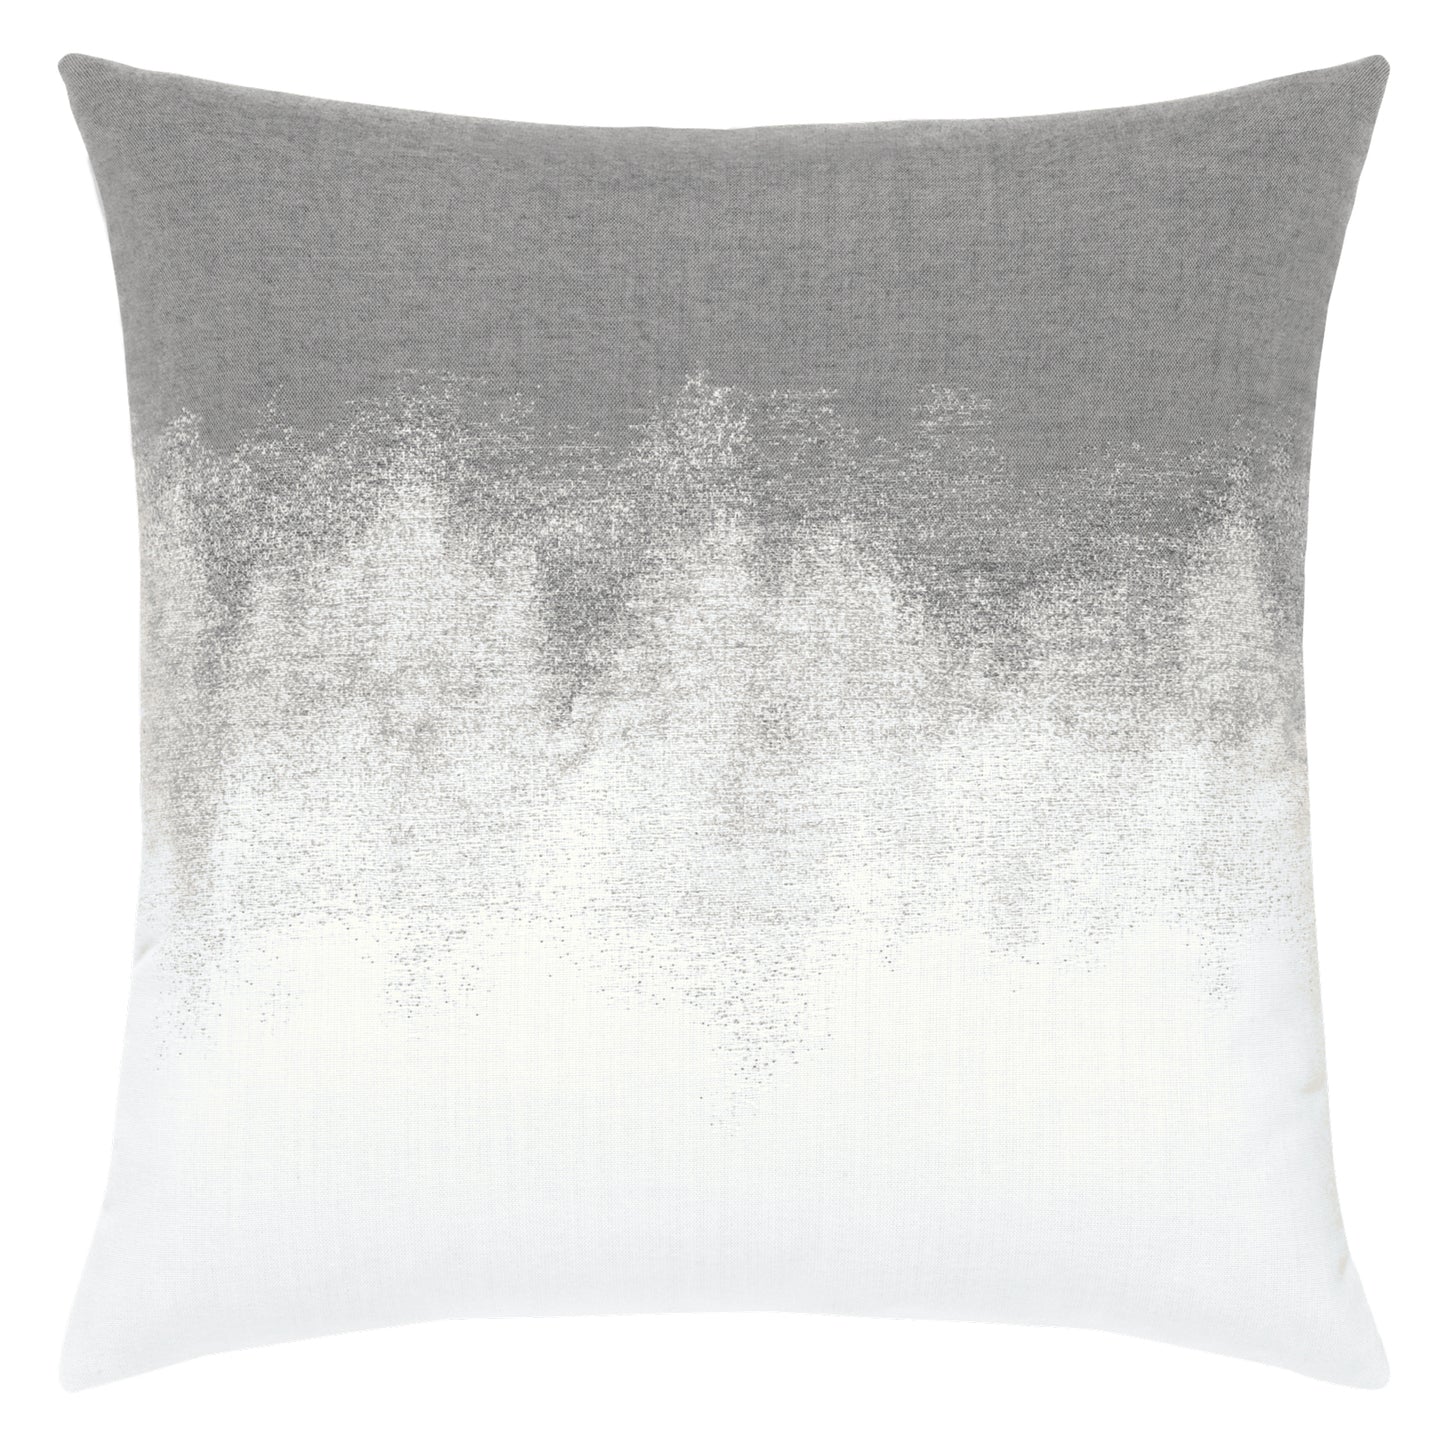 22" Square Elaine Smith Pillow  Artful Charcoal